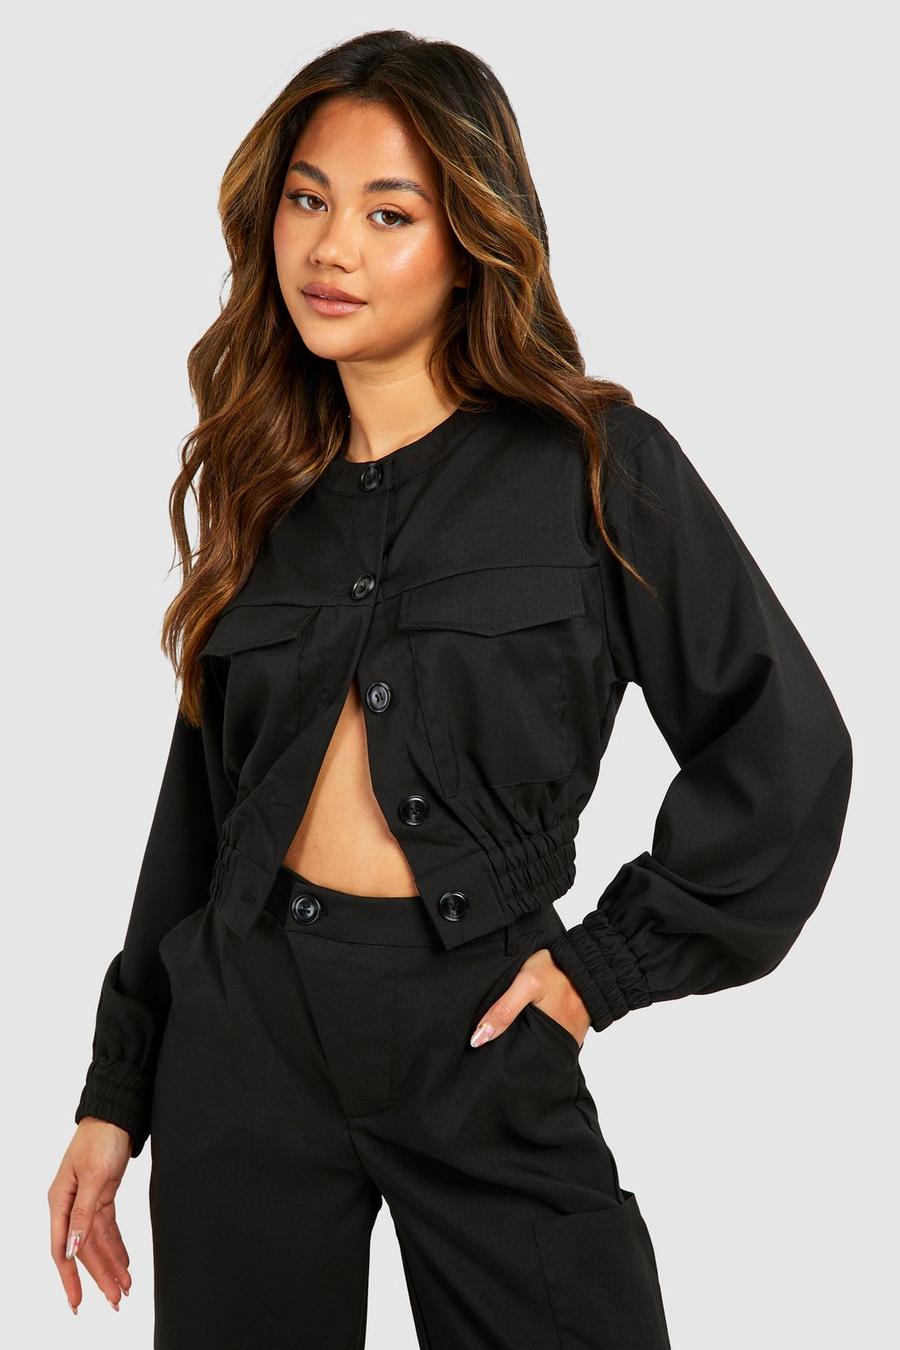 Co Ord Sets | Women's Two Piece Sets & Two Piece Outfits | boohoo UK